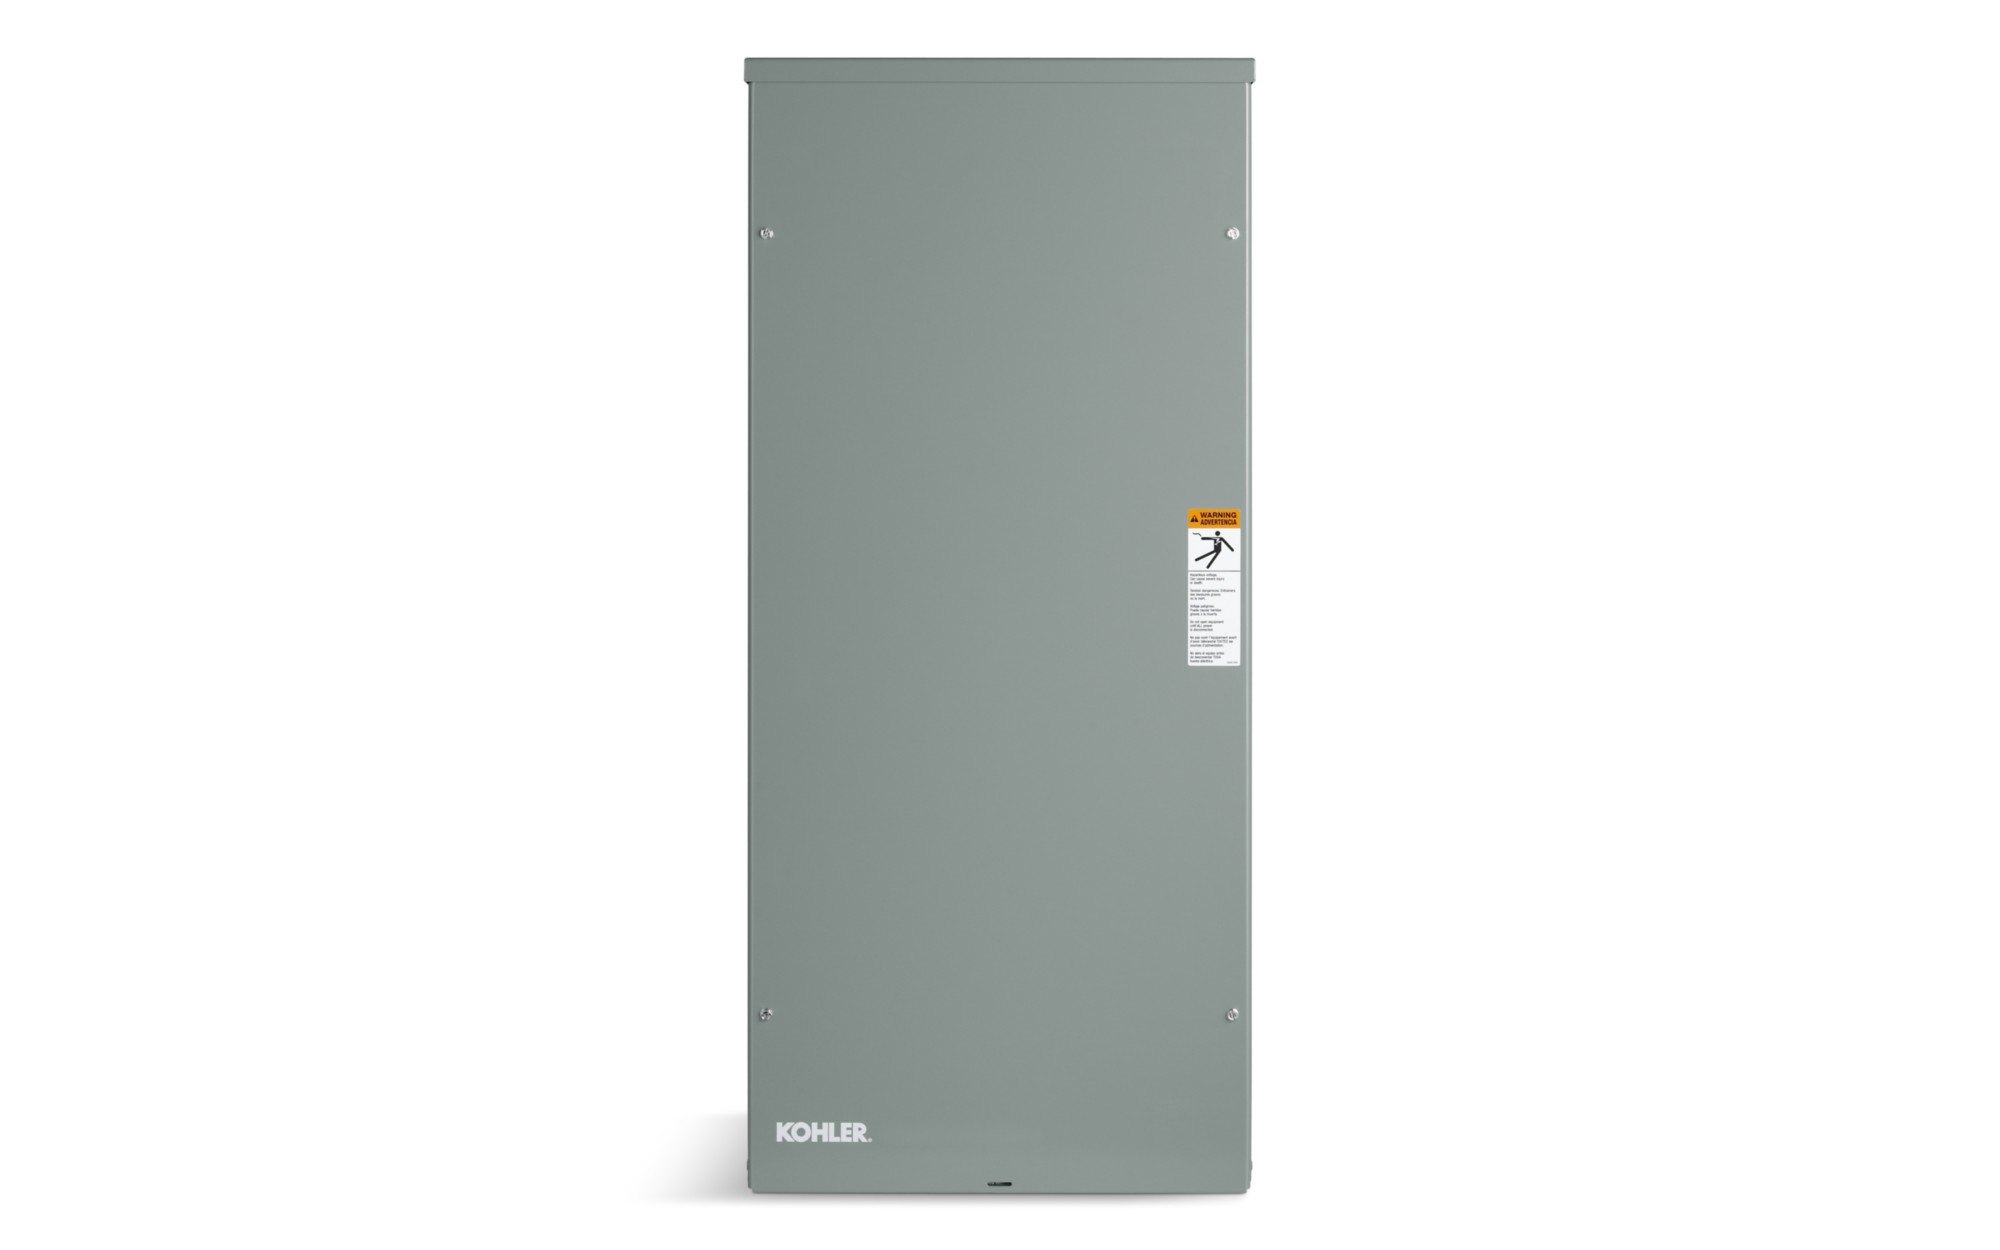 Kohler RXT-JFNC-400ASE 400 Amp Whole-House Indoor/Outdoor Service-Entrance-Rated Automatic Transfer Switch 